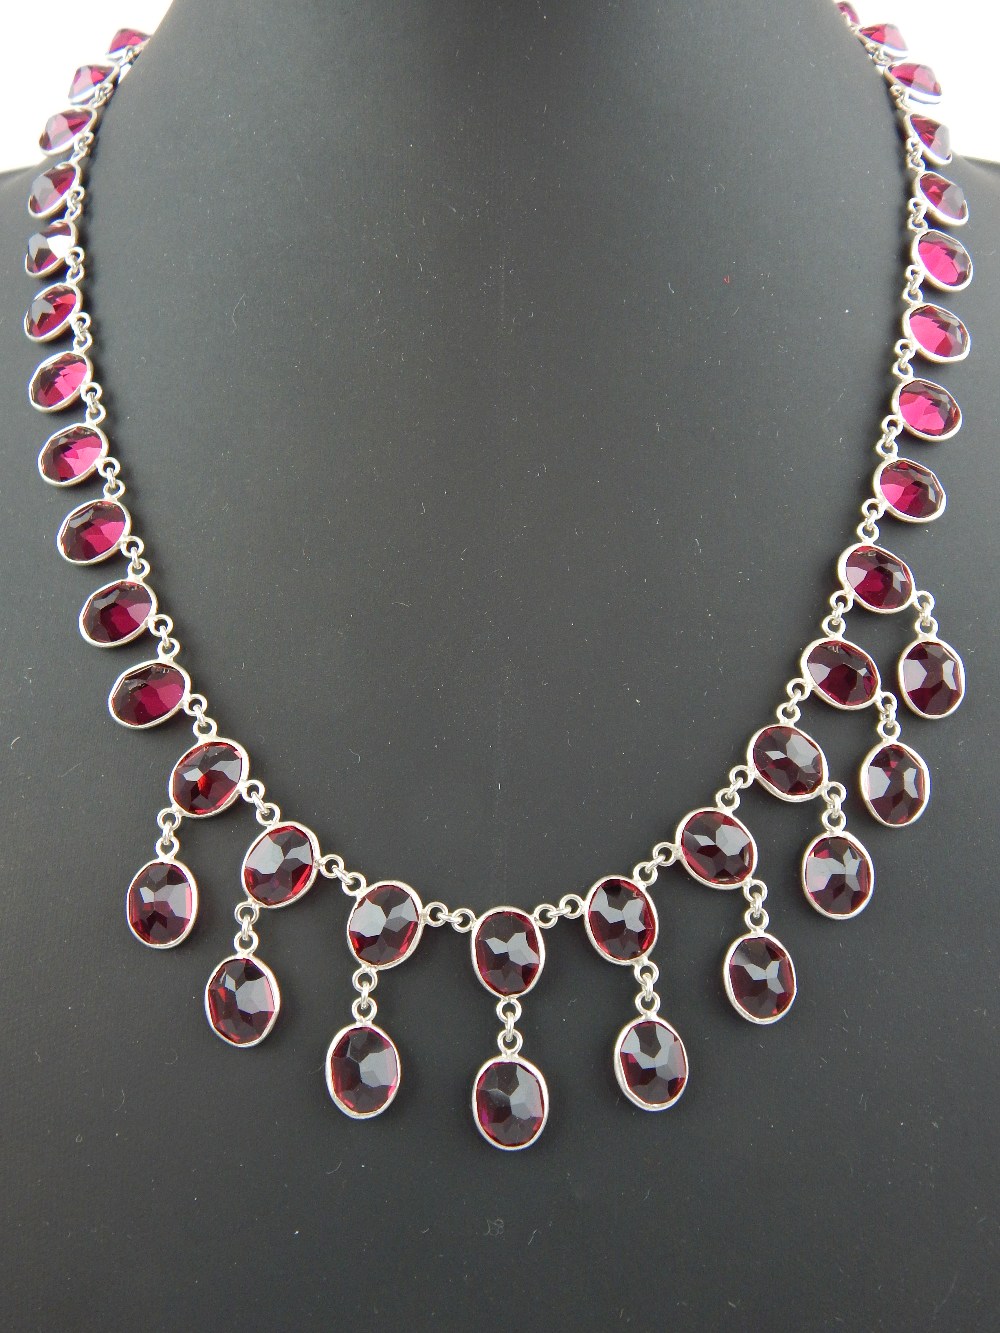 Contemporary silver and red Swarovski crystal necklace set with oval faceted stones, 46 cm l.